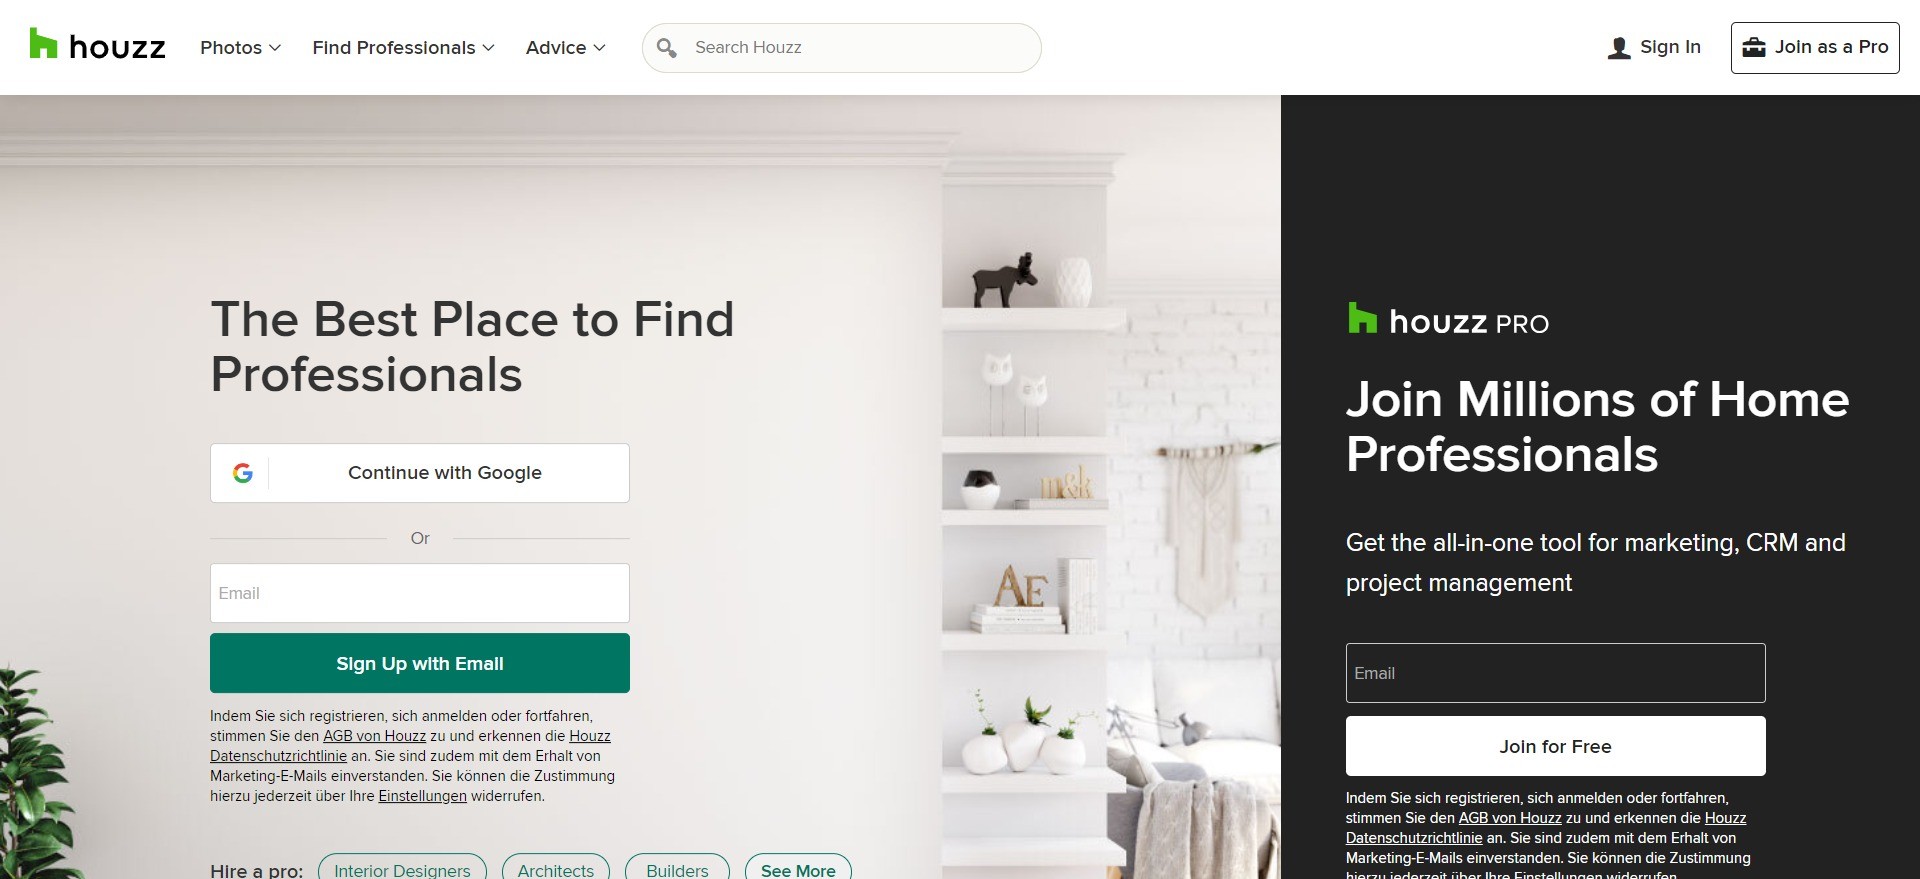 Screenshot of houzz.com.au’s homepage with the Shop Products option missing from the menu bar